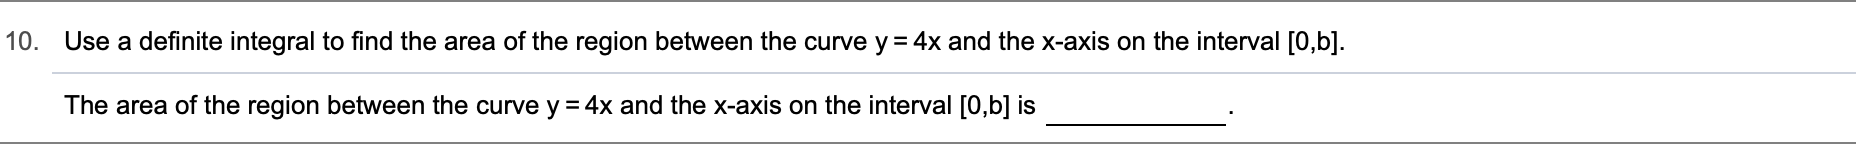 10.
Use a definite integral to find the area of the region between the curve y 4x and the x-axis on the interval [0,b].
The area of the region between the curve y 4x and the x-axis on the interval [0,b] is
